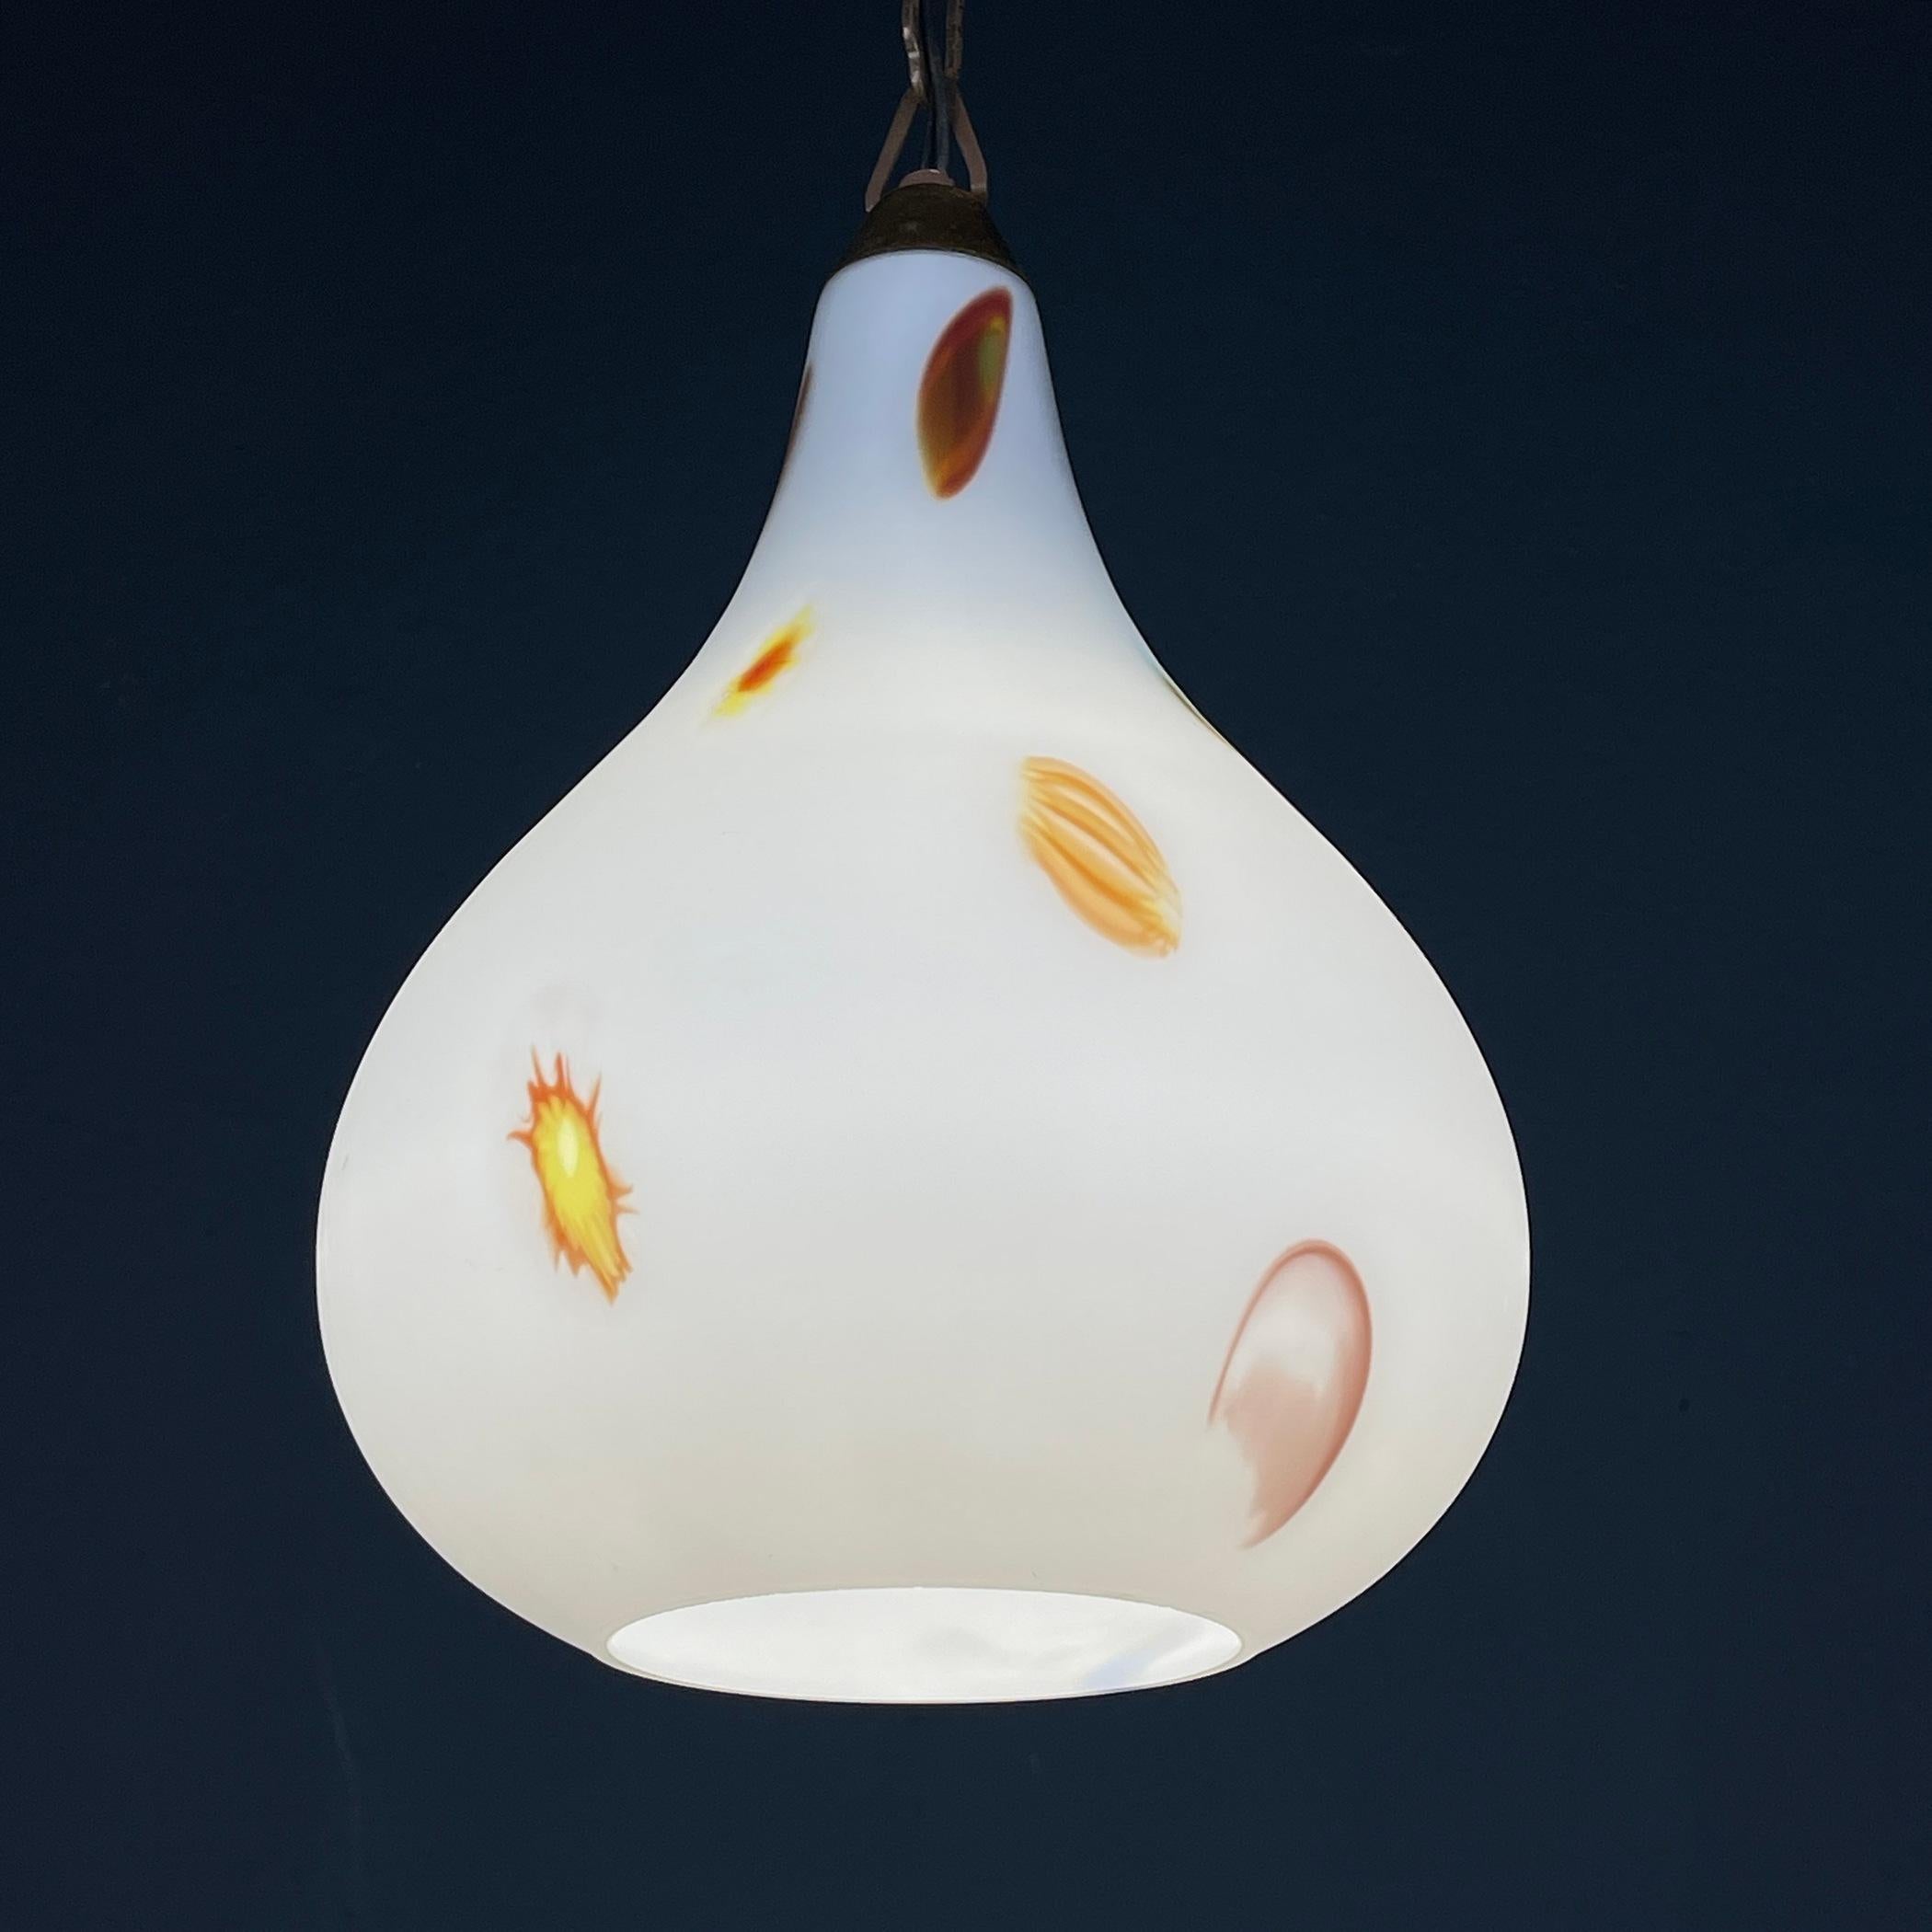 Elevate your interior with this exquisite mid-century Italian hanging lamp, a true gem of design by Stilnova, a renowned Italian lighting manufacturer founded in 1946. Crafted in the 1950s, this lamp embodies the essence of Italian mid-century style